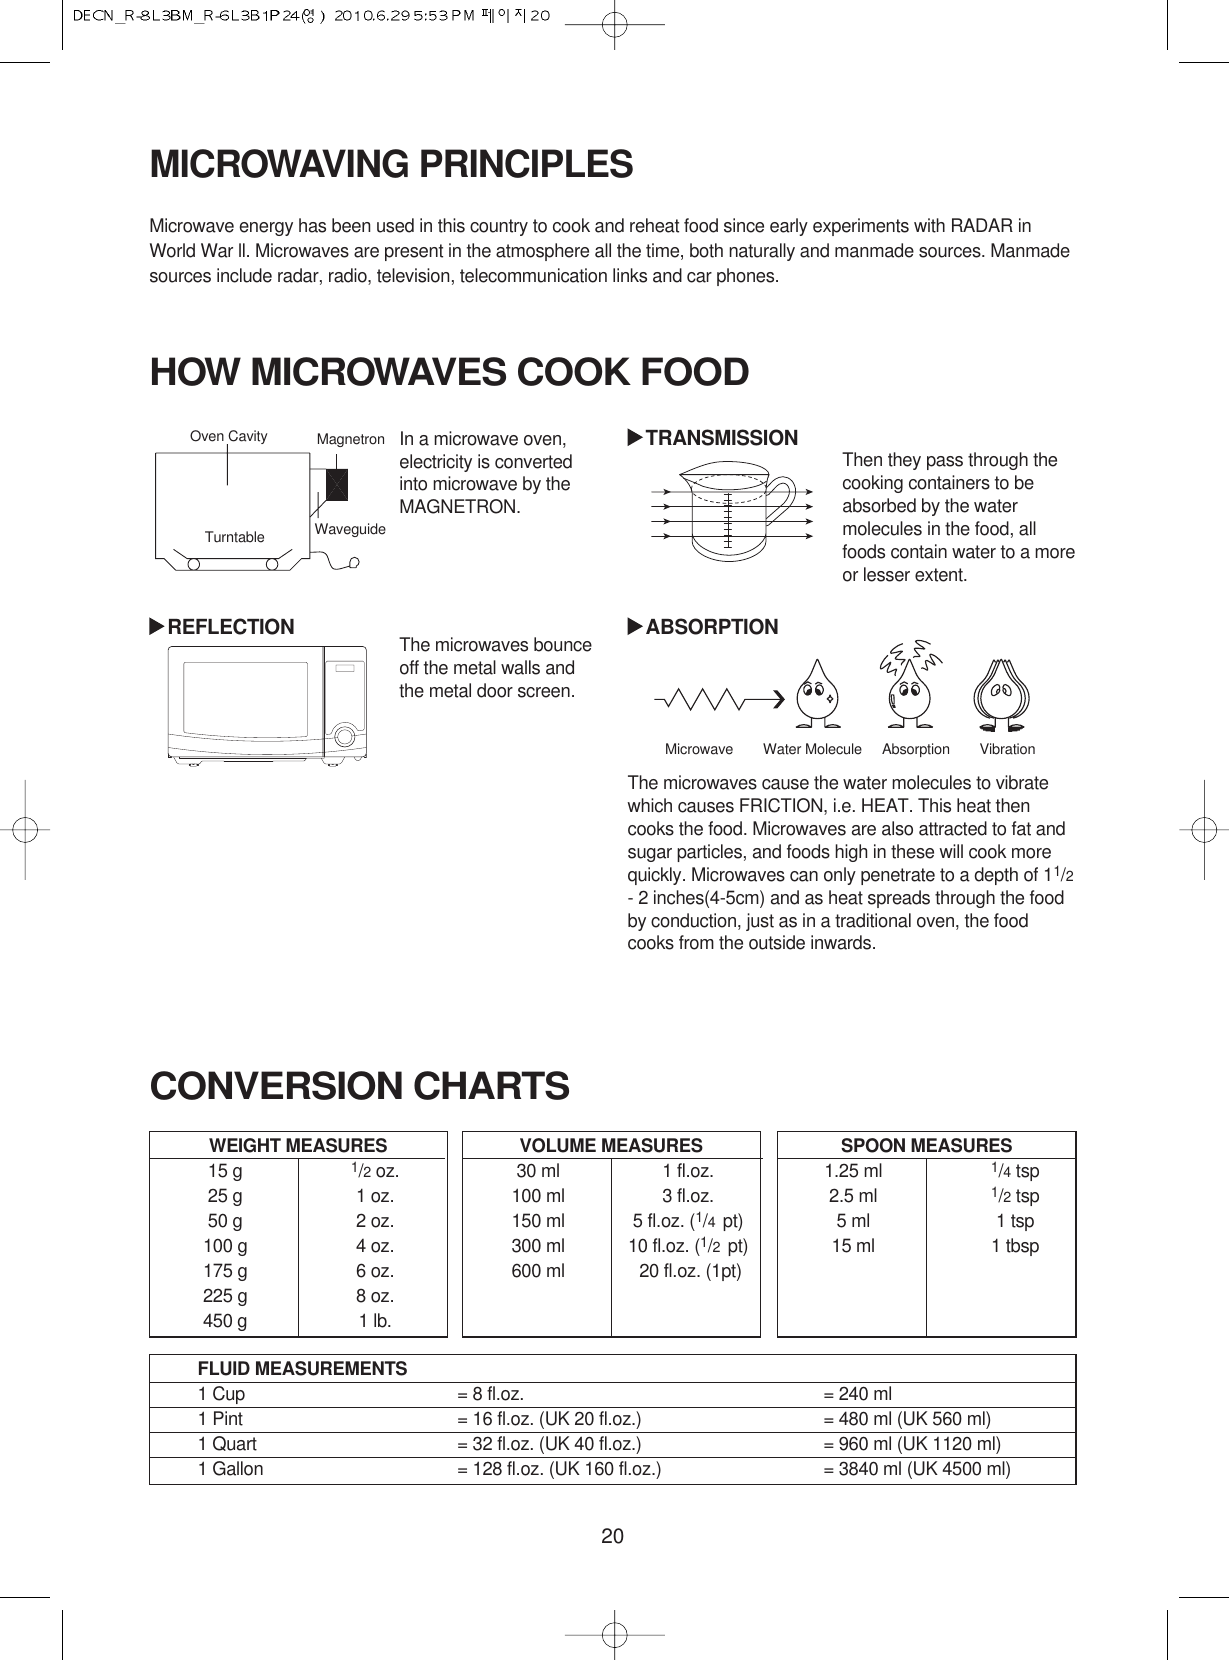 20MICROWAVING PRINCIPLESMicrowave energy has been used in this country to cook and reheat food since early experiments with RADAR inWorld War ll. Microwaves are present in the atmosphere all the time, both naturally and manmade sources. Manmadesources include radar, radio, television, telecommunication links and car phones.CONVERSION CHARTSWEIGHT MEASURES15 g 1/2oz.25 g 1 oz.50 g 2 oz.100 g 4 oz.175 g 6 oz.225 g 8 oz.450 g 1 lb.HOW MICROWAVES COOK FOODVOLUME MEASURES30 ml 1 fl.oz.100 ml 3 fl.oz.150 ml 5 fl.oz. (1/4  pt)300 ml 10 fl.oz. (1/2  pt)600 ml 20 fl.oz. (1pt)SPOON MEASURES1.25 ml 1/4tsp2.5 ml 1/2tsp5 ml 1 tsp15 ml 1 tbspFLUID MEASUREMENTS1 Cup = 8 fl.oz. = 240 ml1 Pint = 16 fl.oz. (UK 20 fl.oz.) = 480 ml (UK 560 ml)1 Quart = 32 fl.oz. (UK 40 fl.oz.) = 960 ml (UK 1120 ml)1 Gallon = 128 fl.oz. (UK 160 fl.oz.) = 3840 ml (UK 4500 ml)Then they pass through thecooking containers to beabsorbed by the watermolecules in the food, allfoods contain water to a moreor lesser extent.The microwaves cause the water molecules to vibratewhich causes FRICTION, i.e. HEAT. This heat thencooks the food. Microwaves are also attracted to fat andsugar particles, and foods high in these will cook morequickly. Microwaves can only penetrate to a depth of 11/2- 2 inches(4-5cm) and as heat spreads through the foodby conduction, just as in a traditional oven, the foodcooks from the outside inwards.In a microwave oven,electricity is convertedinto microwave by theMAGNETRON.The microwaves bounceoff the metal walls andthe metal door screen.Oven Cavity MagnetronWaveguideTurntableREFLECTIONTRANSMISSIONABSORPTIONMicrowave Water Molecule Absorption Vibration